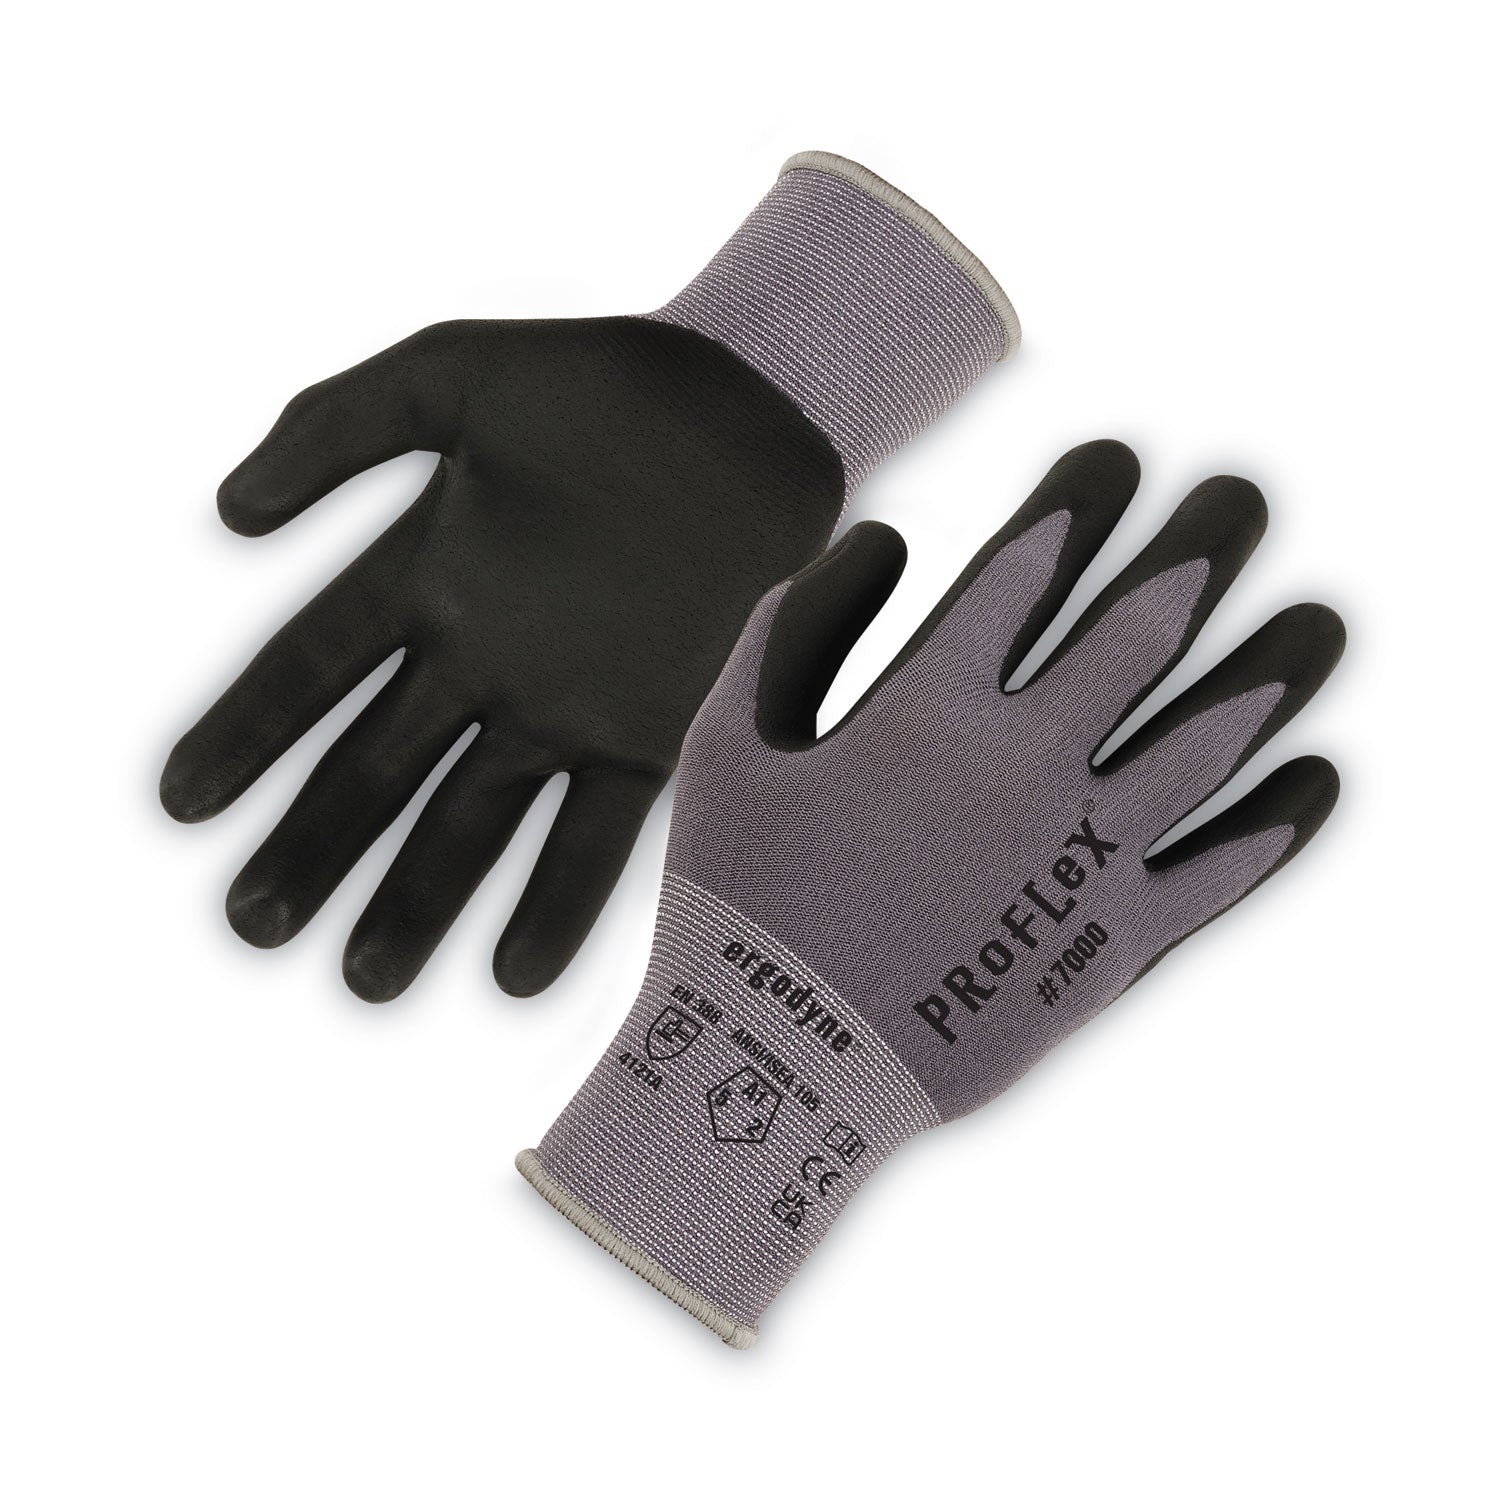 proflex-7000-nitrile-coated-gloves-microfoam-palm-gray-x-large-pair-ships-in-1-3-business-days_ego10375 - 1